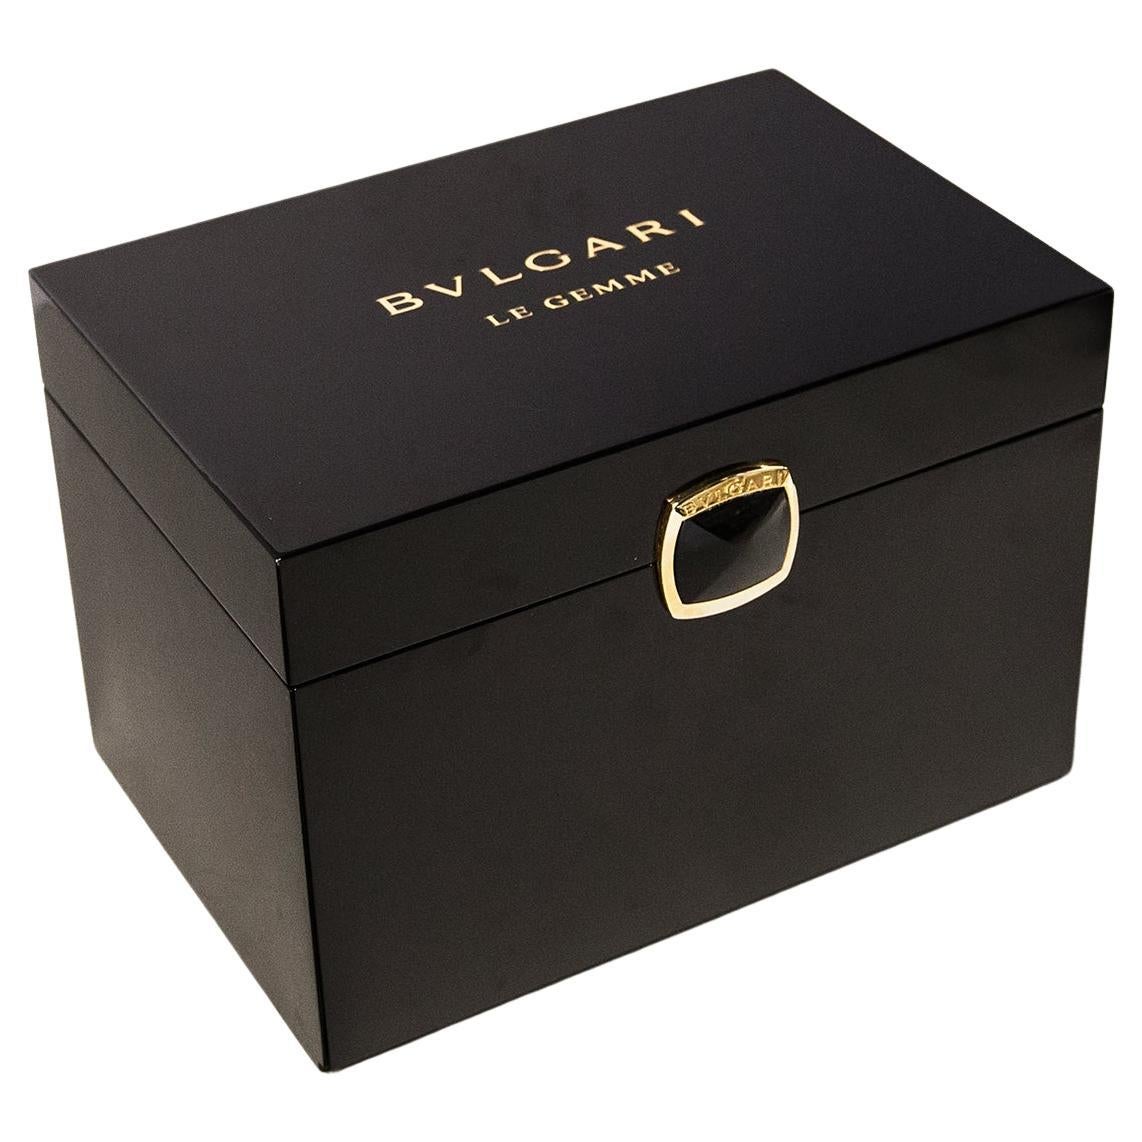 Huge Bvlgari China Lacquer Jewelry Le Gemme Box